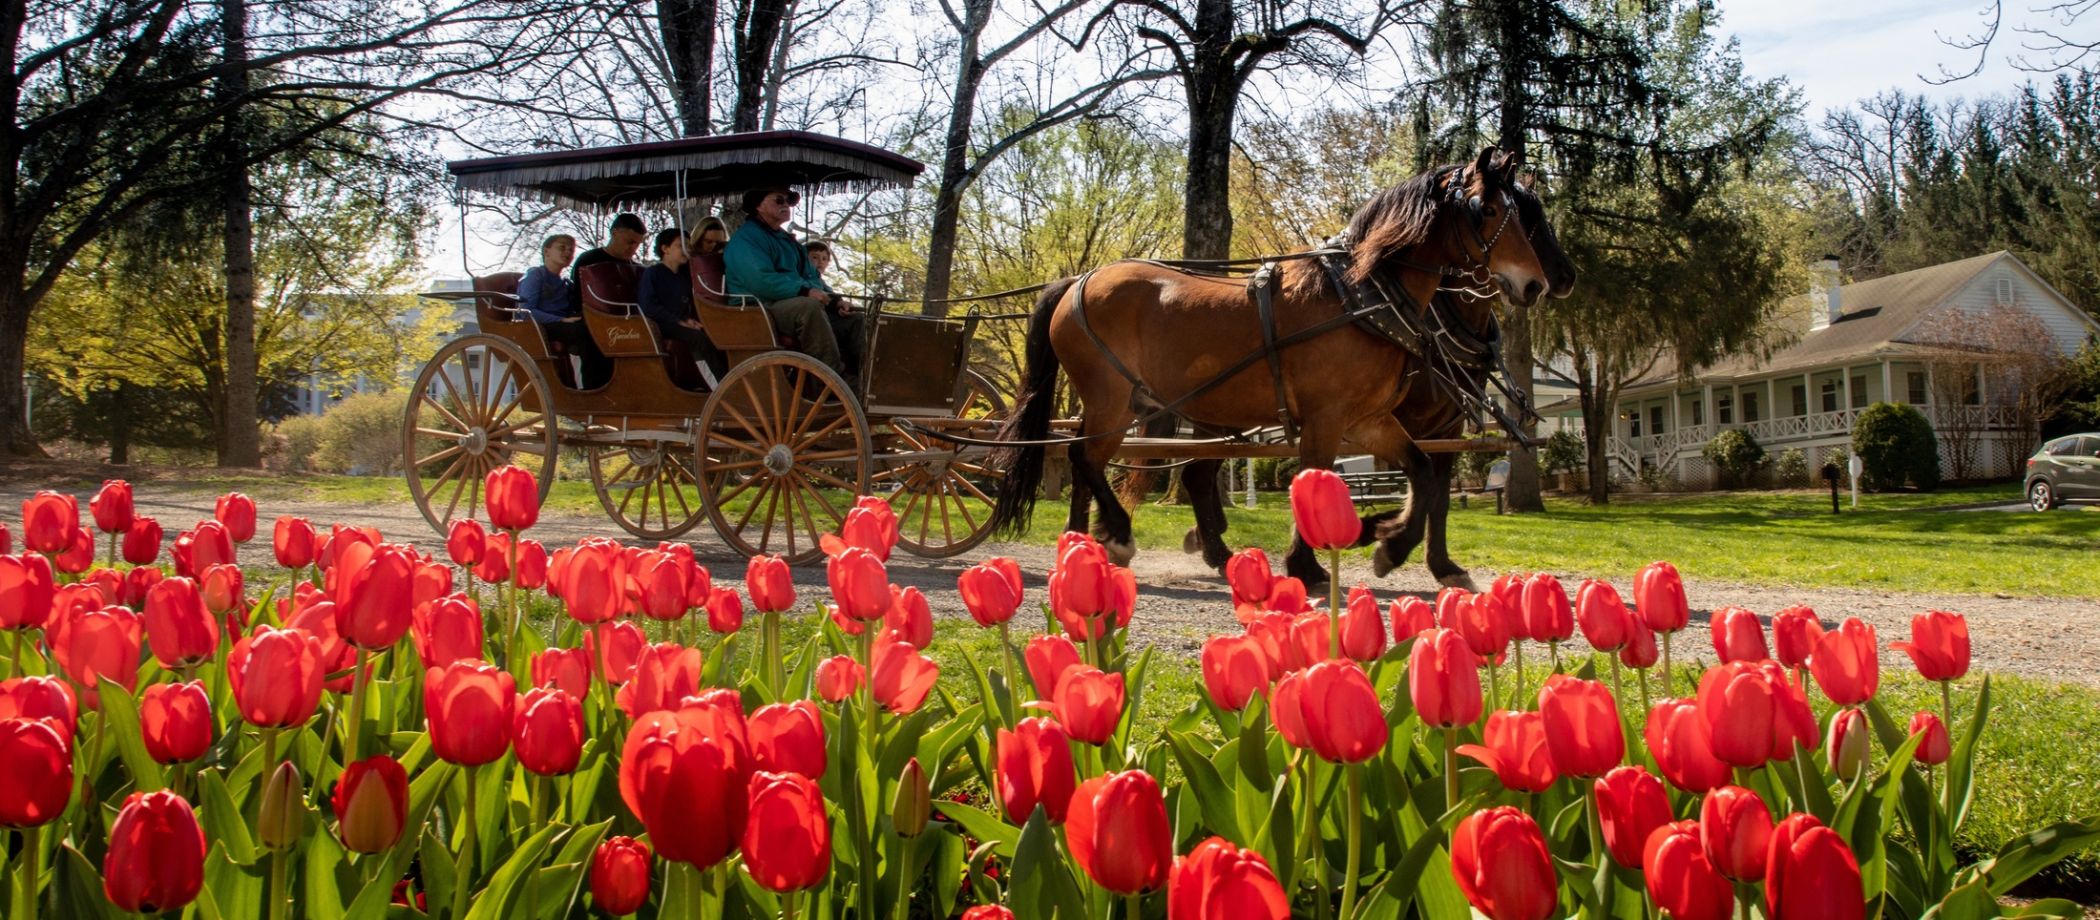 carriage-ride-with-tulips-in-garden